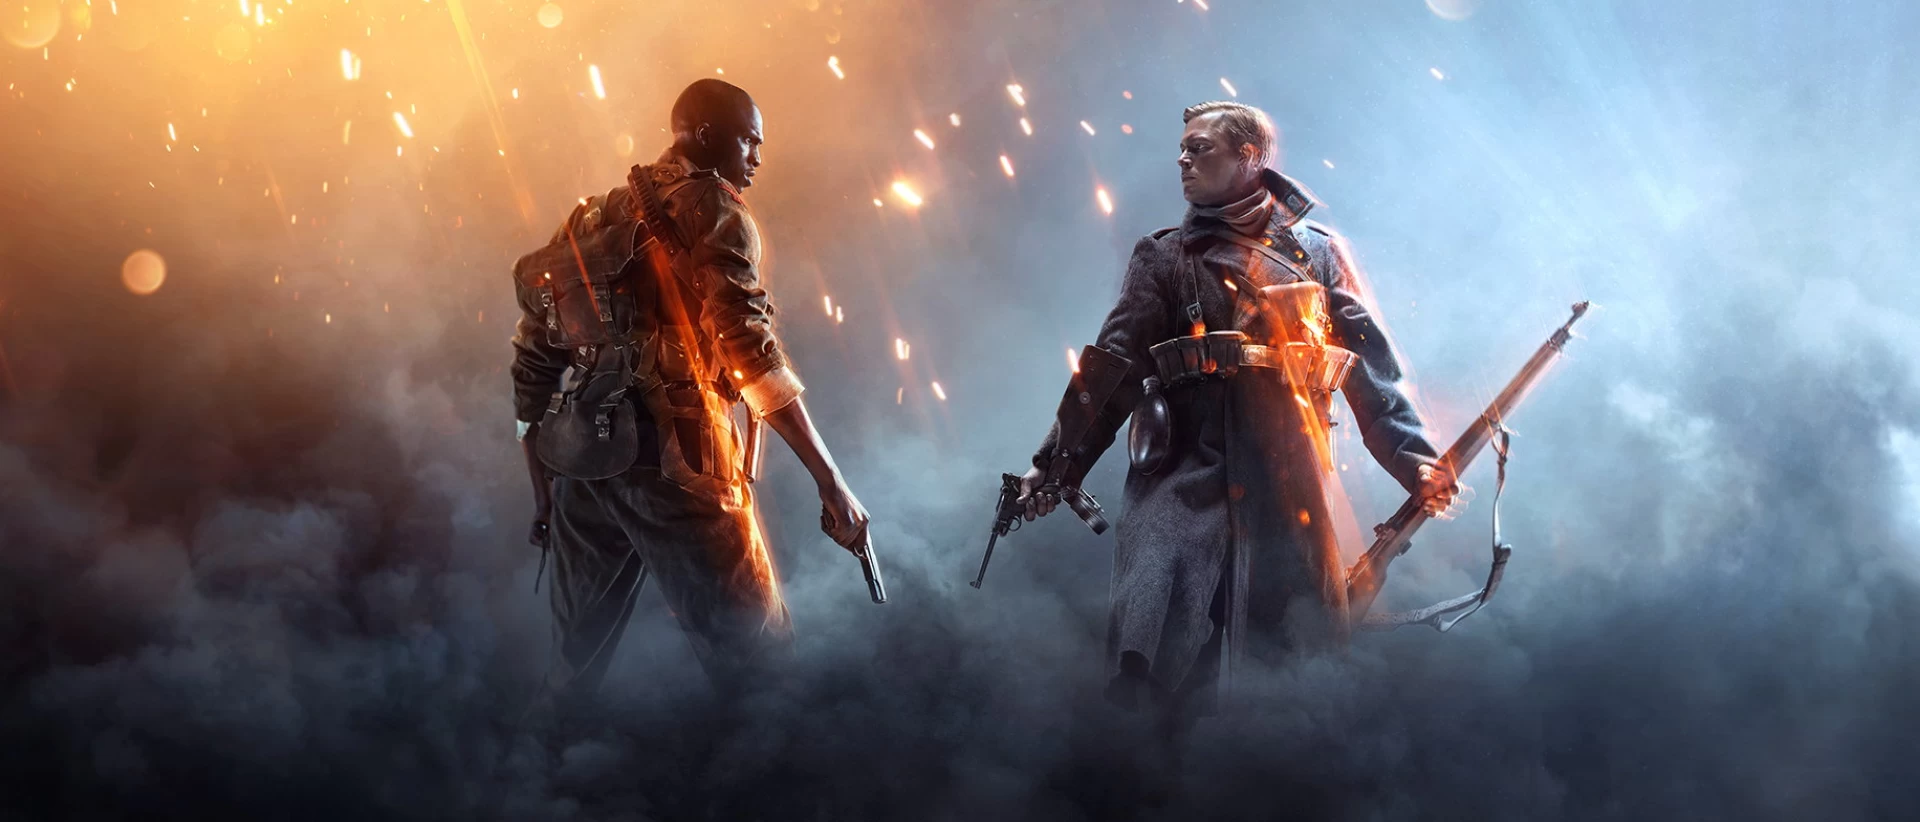 BF4 has more current players compared to Starwars Battlefront on the PC